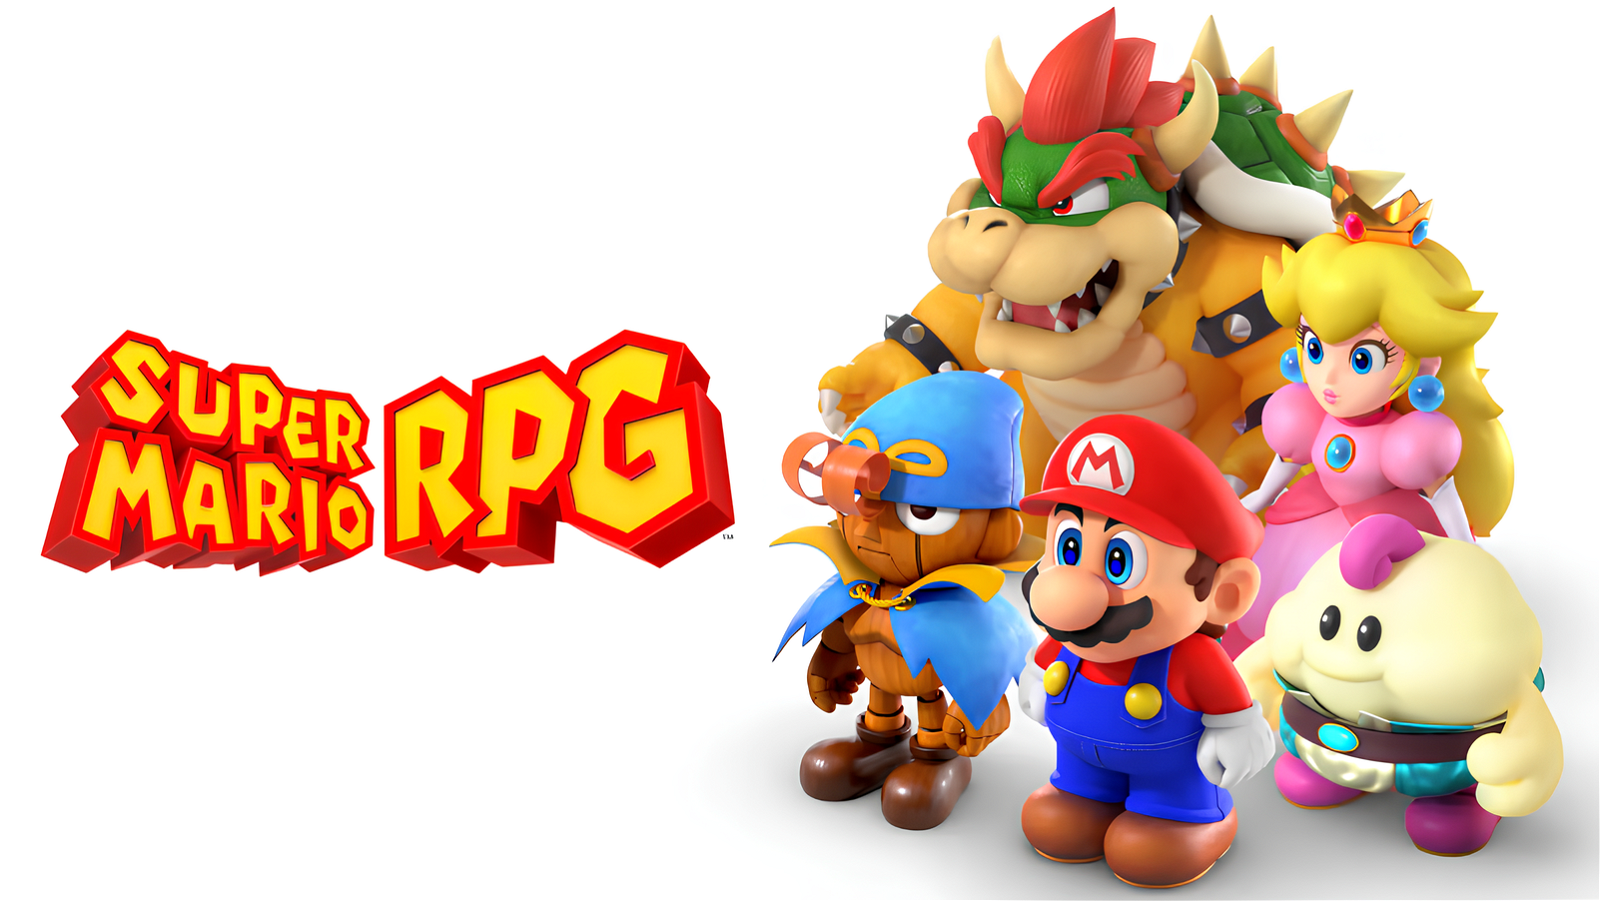 Super Mario RPG is releasing for Nintendo Switch on November 17, 2023